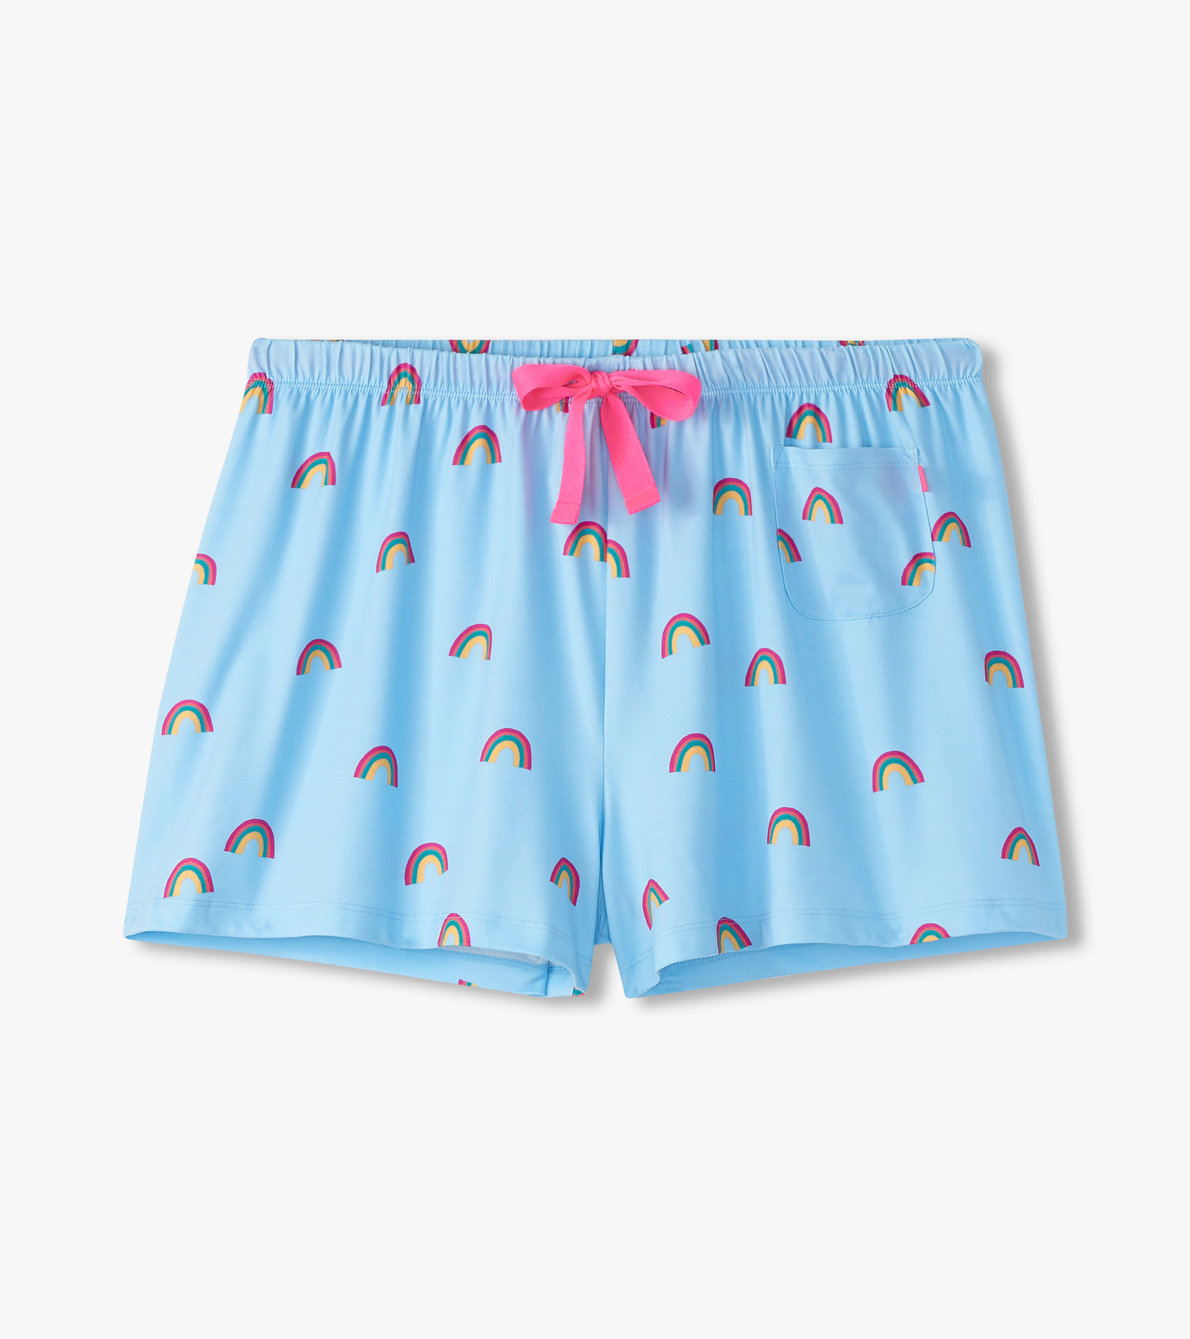 View larger image of Capelton Road Women's Lucky Rainbow Pajama Shorts